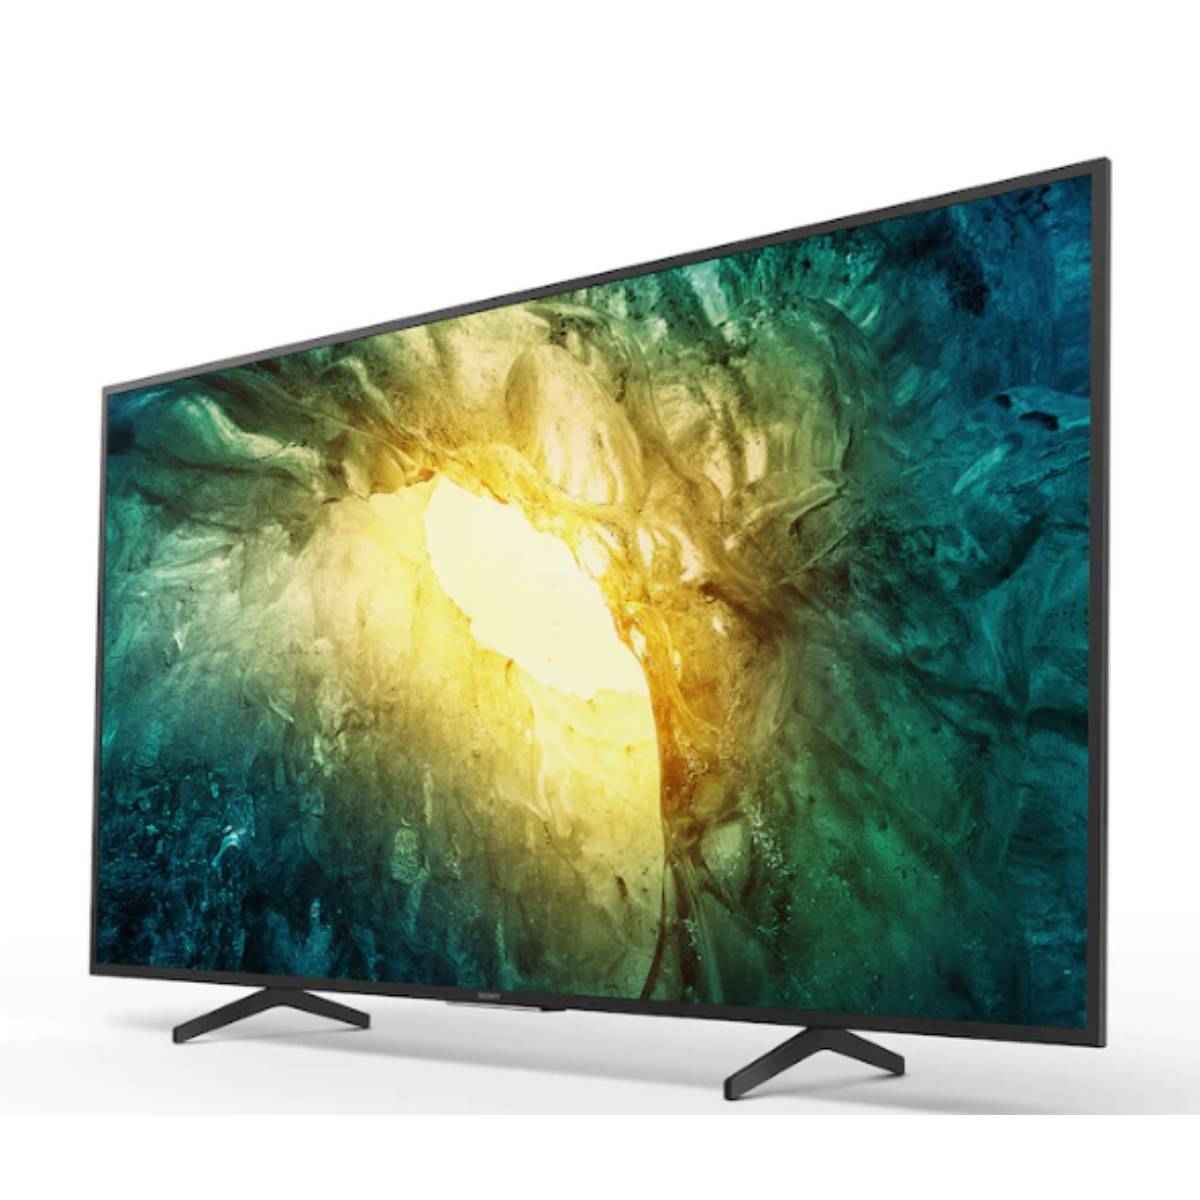 Sony 55 inch 4K Ultra HD Android Smart TV (KD-55X7500H)